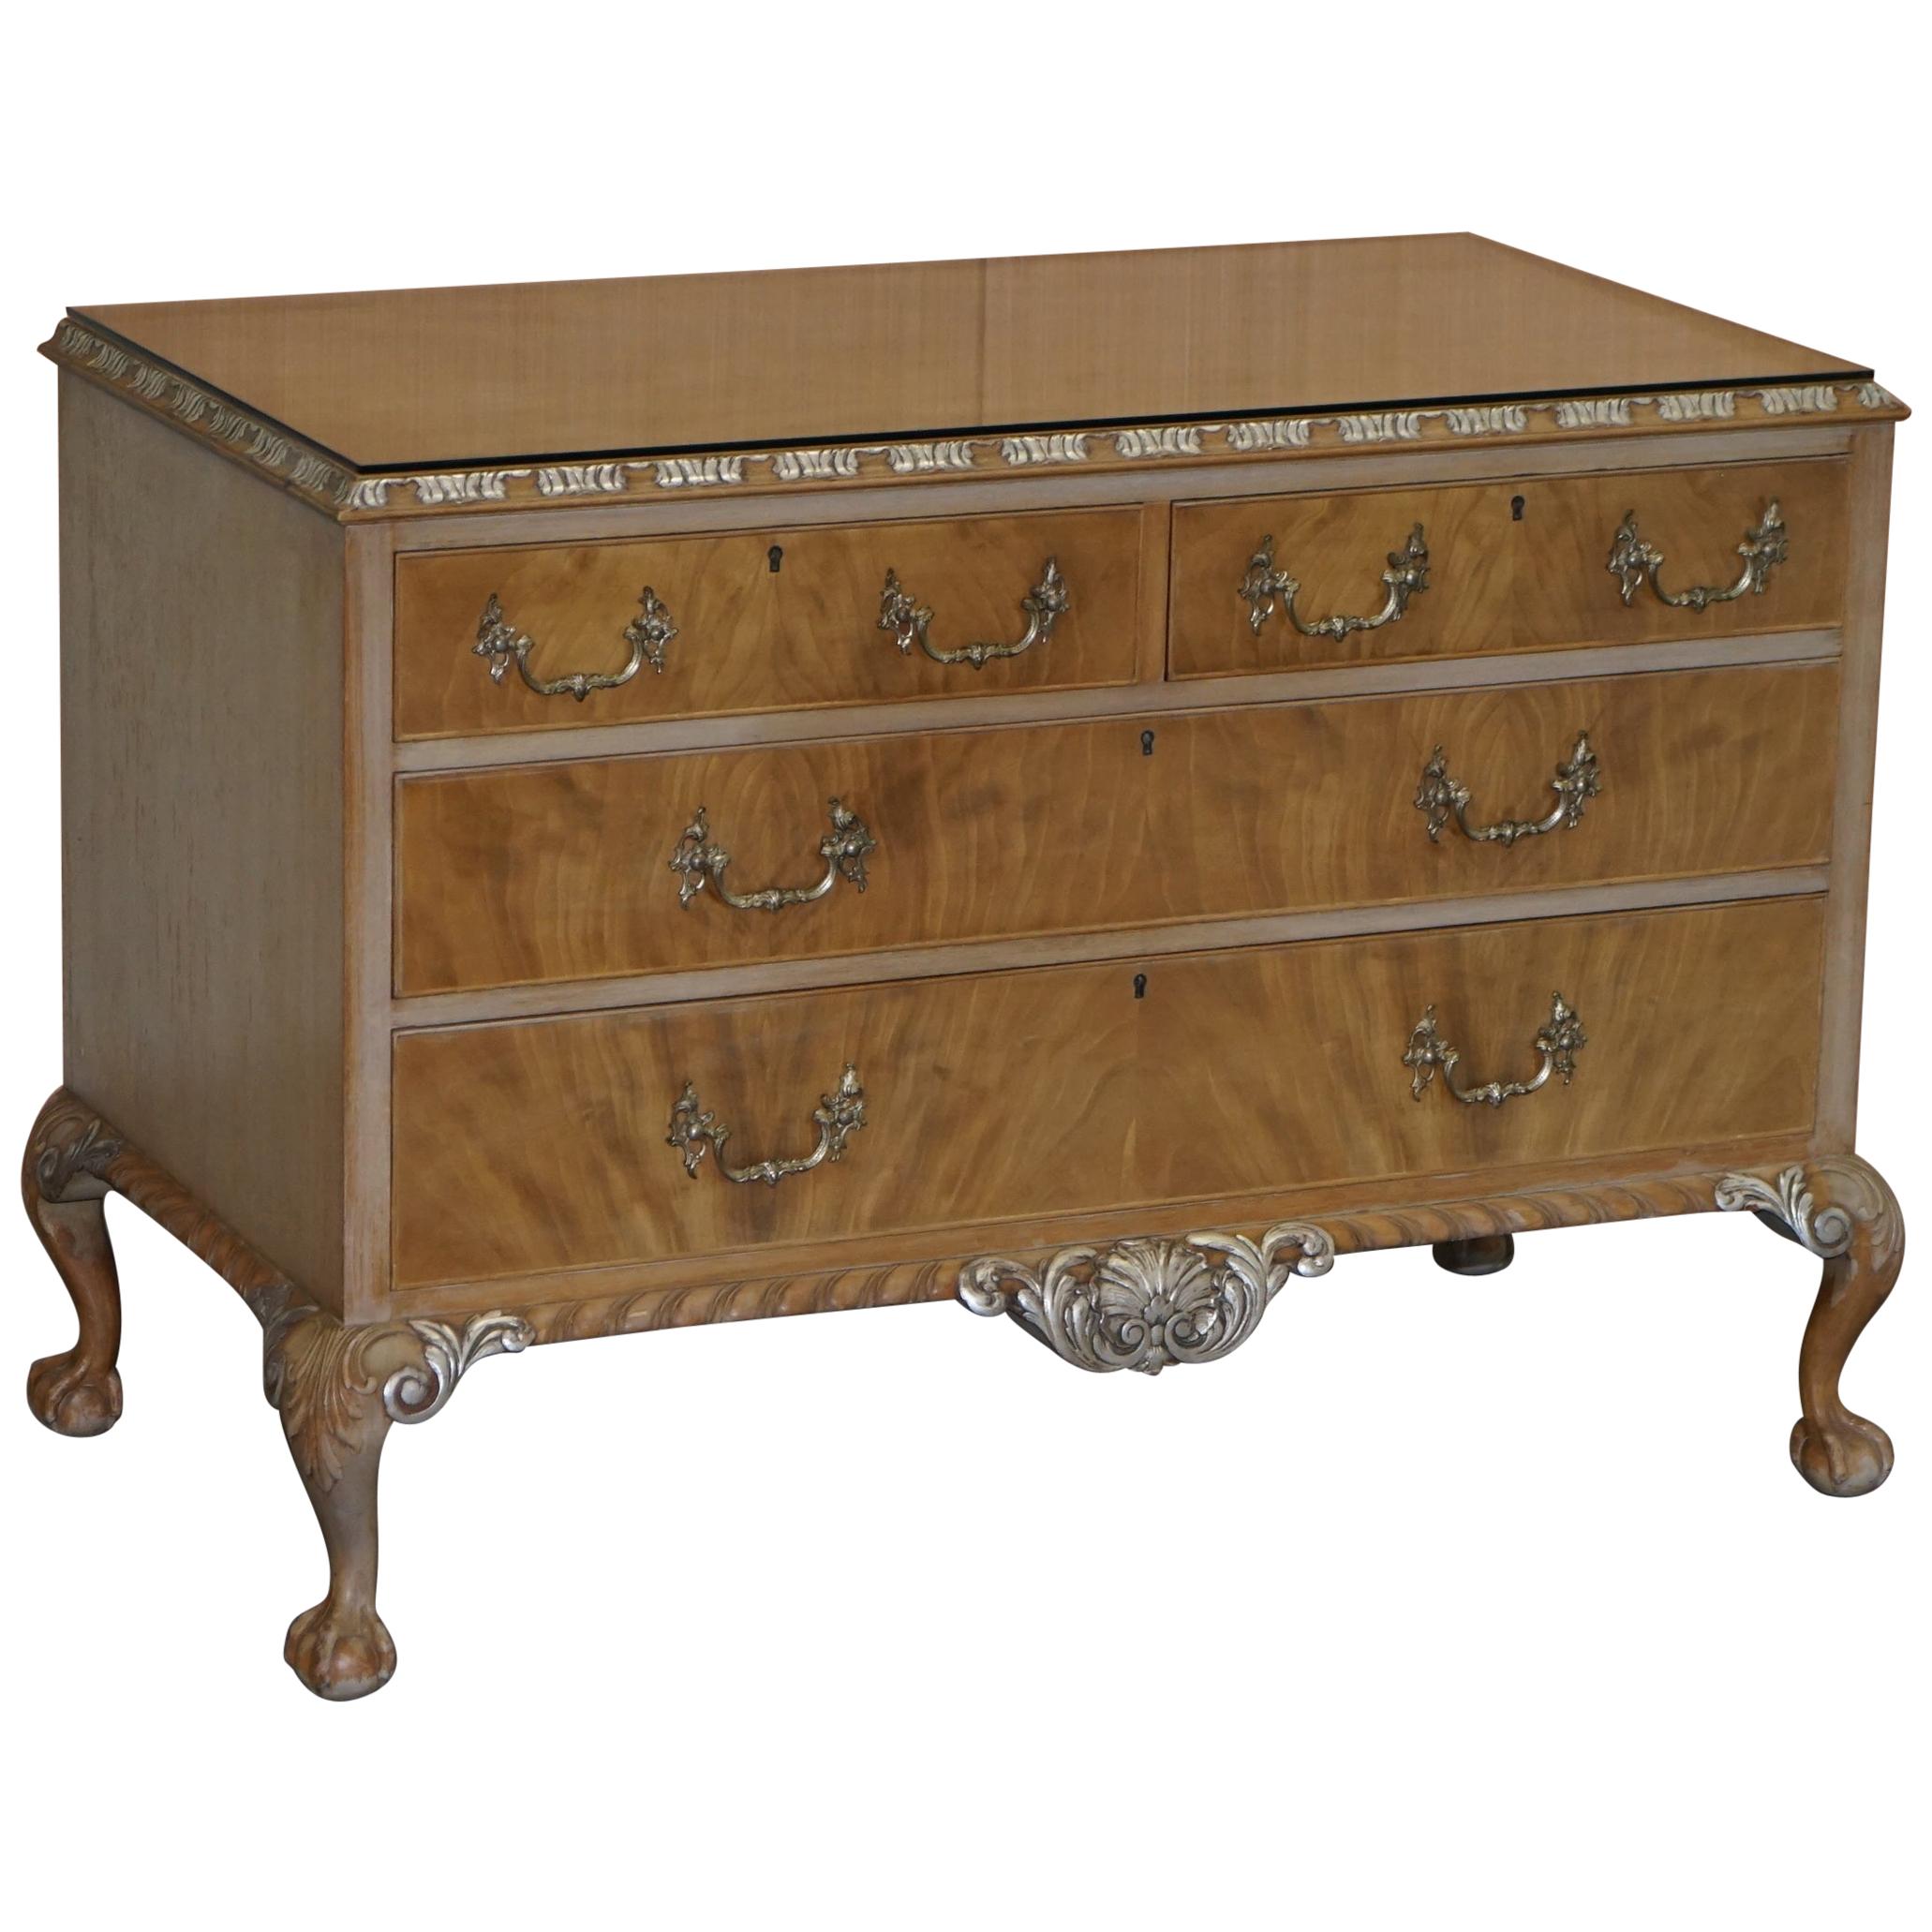 Stunning Gillows Vintage Chest of Drawers Ornate Claw & Ball Feet Part of Suite